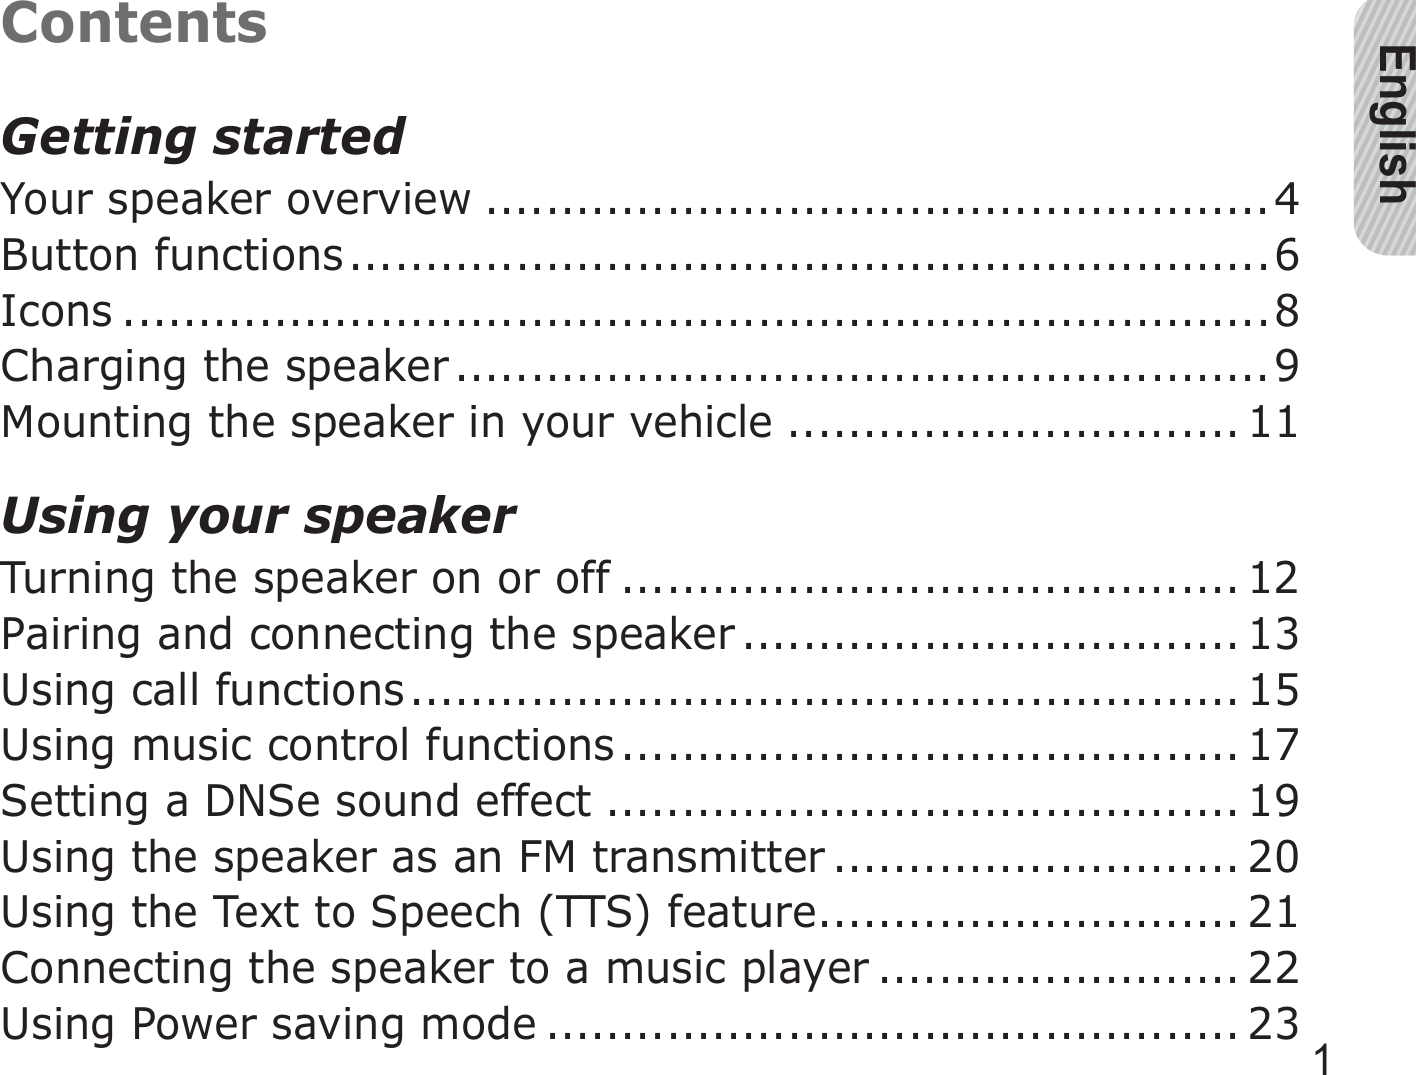 English1ContentsGetting startedYour speaker overview ....................................................4Button functions .............................................................6Icons ............................................................................8Charging the speaker ......................................................9Mounting the speaker in your vehicle .............................. 11Using your speakerTurning the speaker on or off ......................................... 12Pairing and connecting the speaker ................................. 13Using call functions ....................................................... 15Using music control functions ......................................... 17Setting a DNSe sound effect .......................................... 19Using the speaker as an FM transmitter ........................... 20Using the Text to Speech (TTS) feature ............................ 21Connecting the speaker to a music player ........................ 22Using Power saving mode .............................................. 23